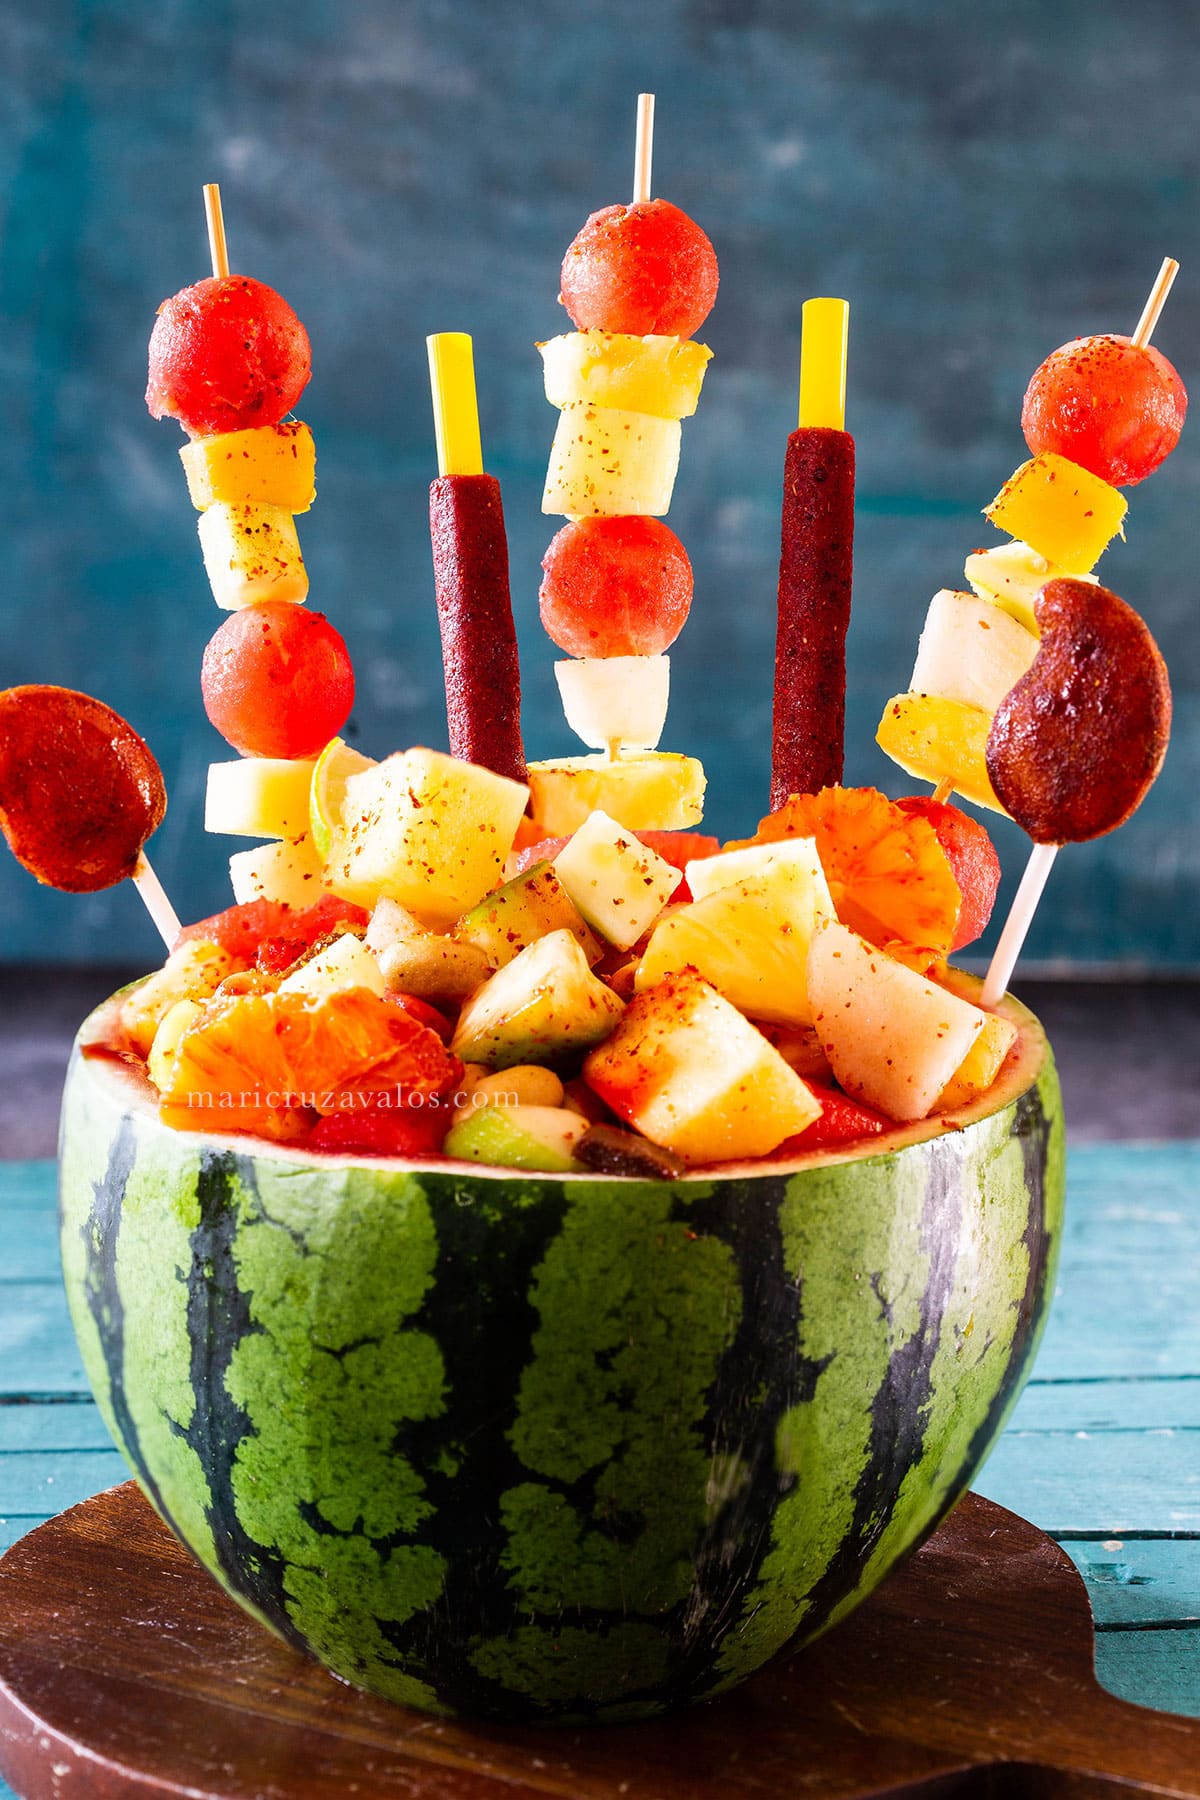 Sandia loca (crazy watermelon) decorated with fruit skewers and Mexican candies.